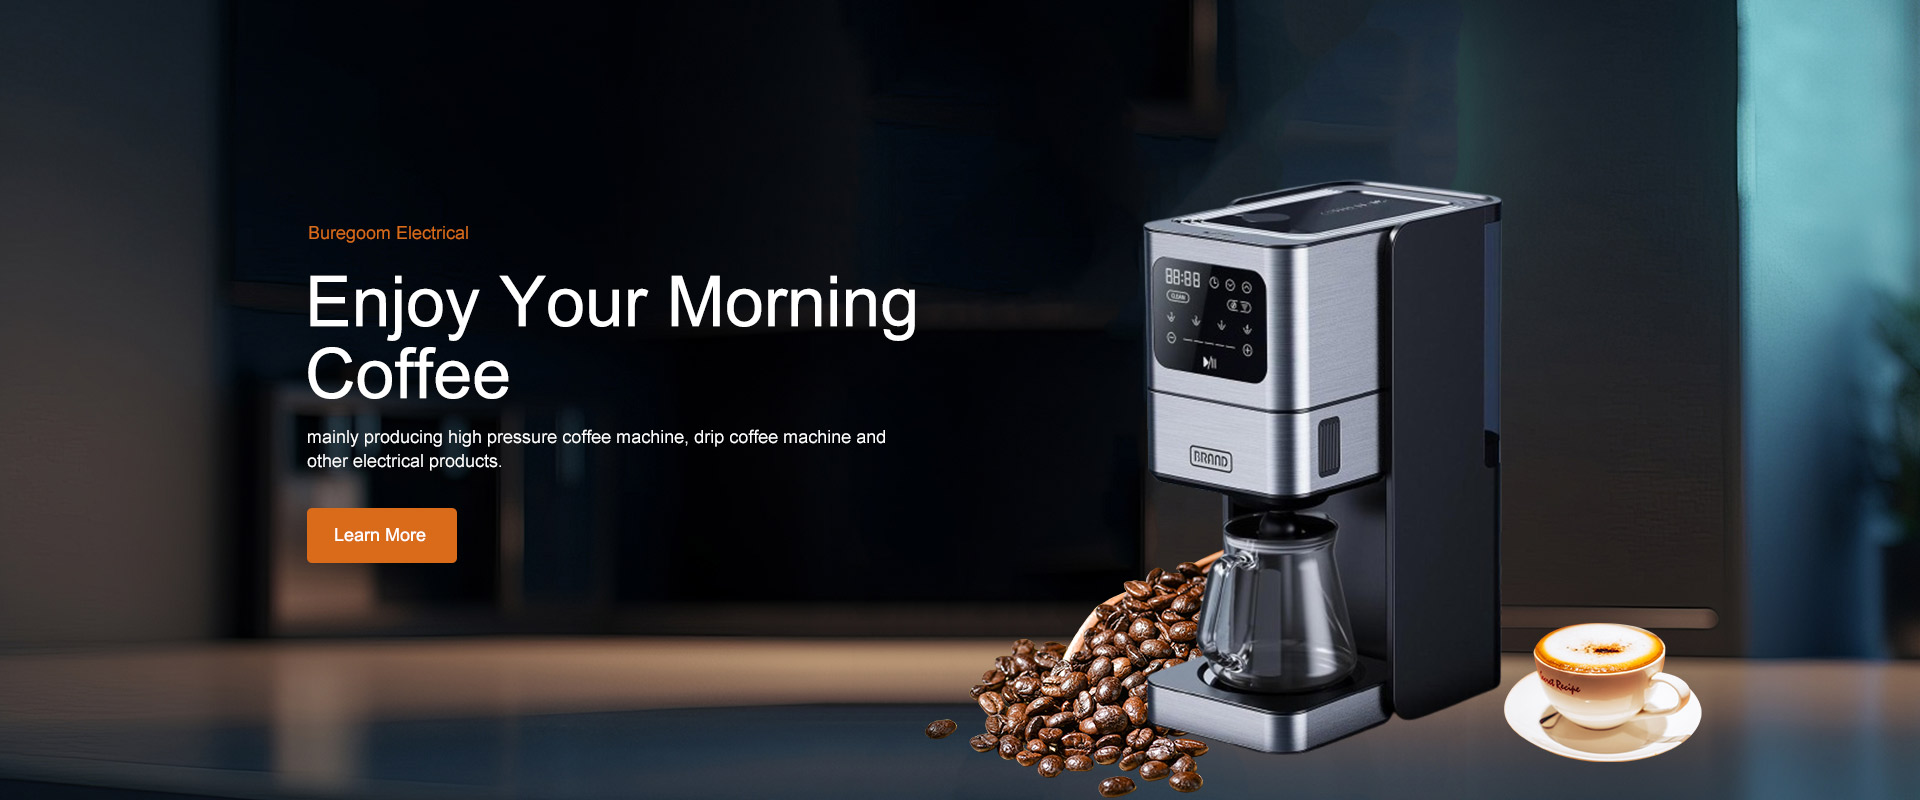 mainly producing high pressure coffee machine, drip coffee machine and other electrical products.